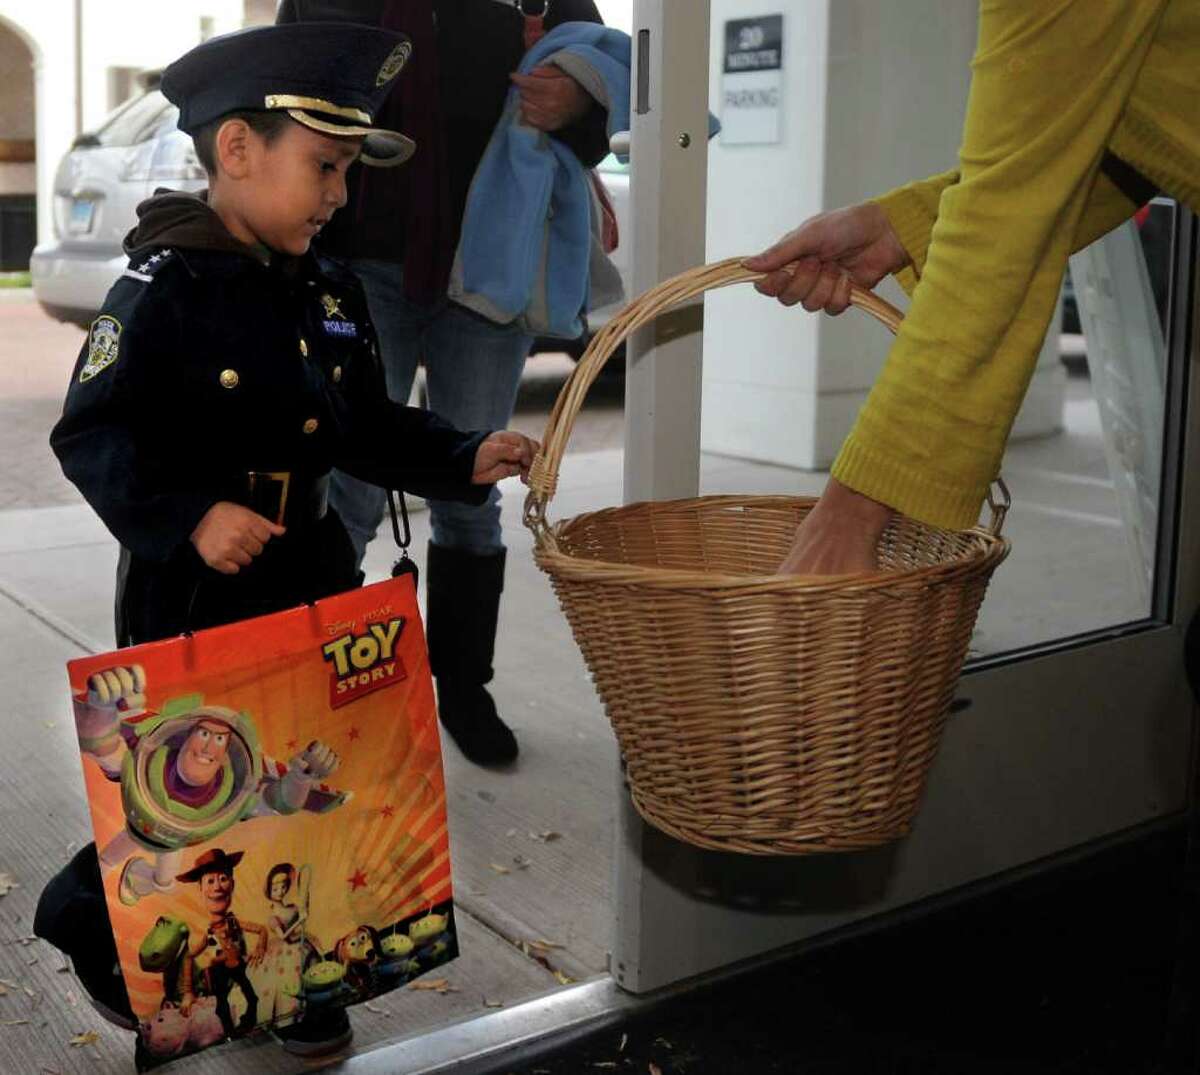 Anthony Luna, 4, gets candy from Minette and Rock during the Trick or Treat on Safety Street event in Fairfield on Friday, October 29, 2010.